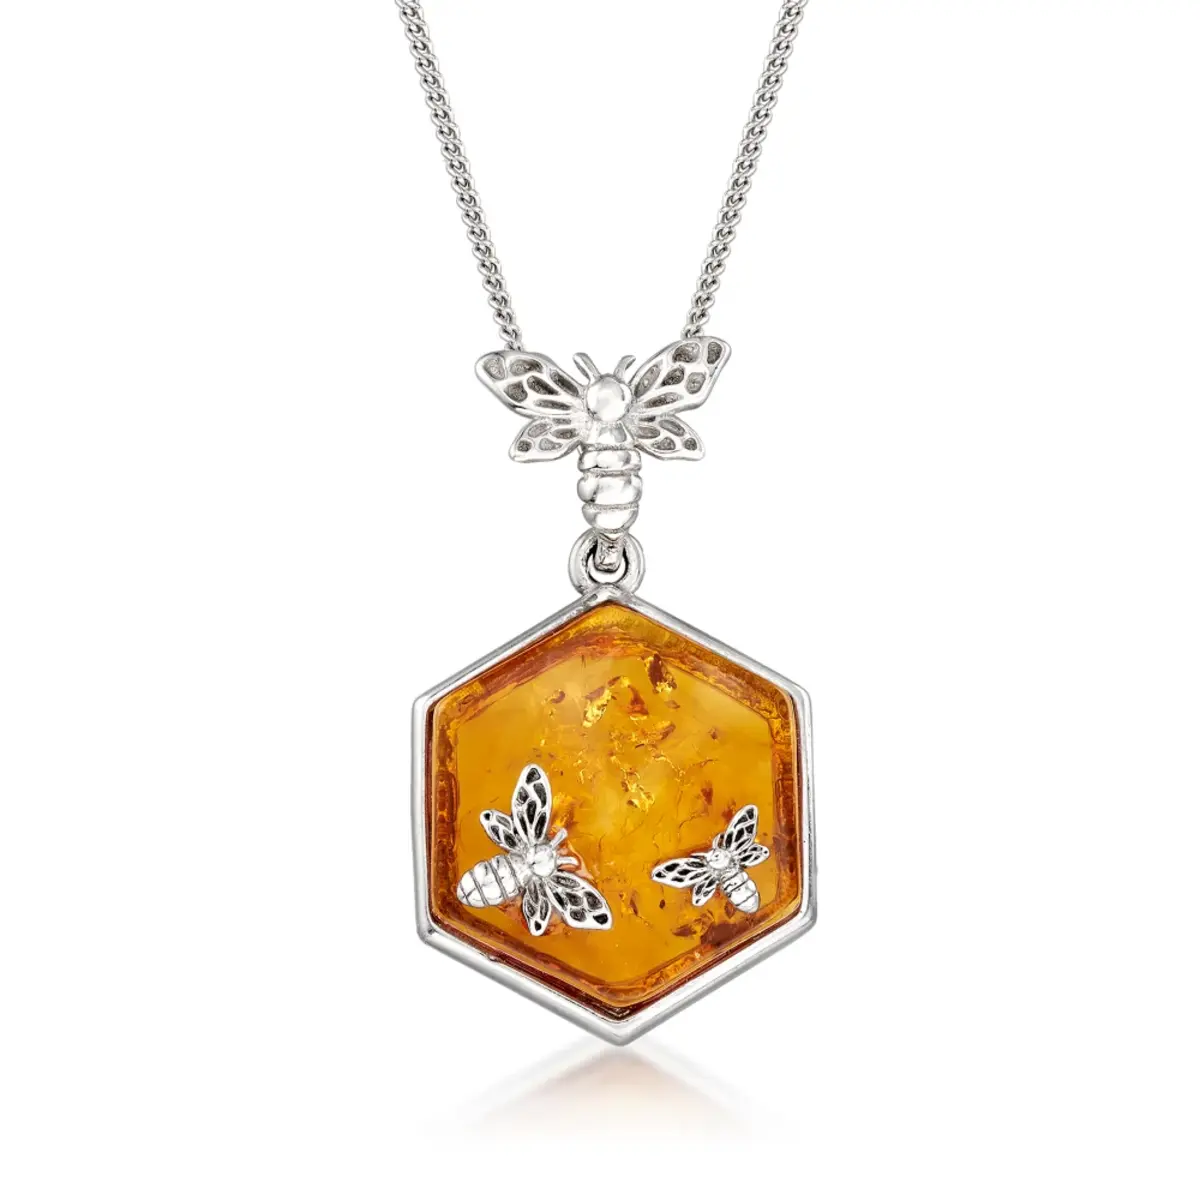 Ross-Simons Amber Honeycomb and Bumblebee Pendant Necklace in Sterling Silver. 18 inches